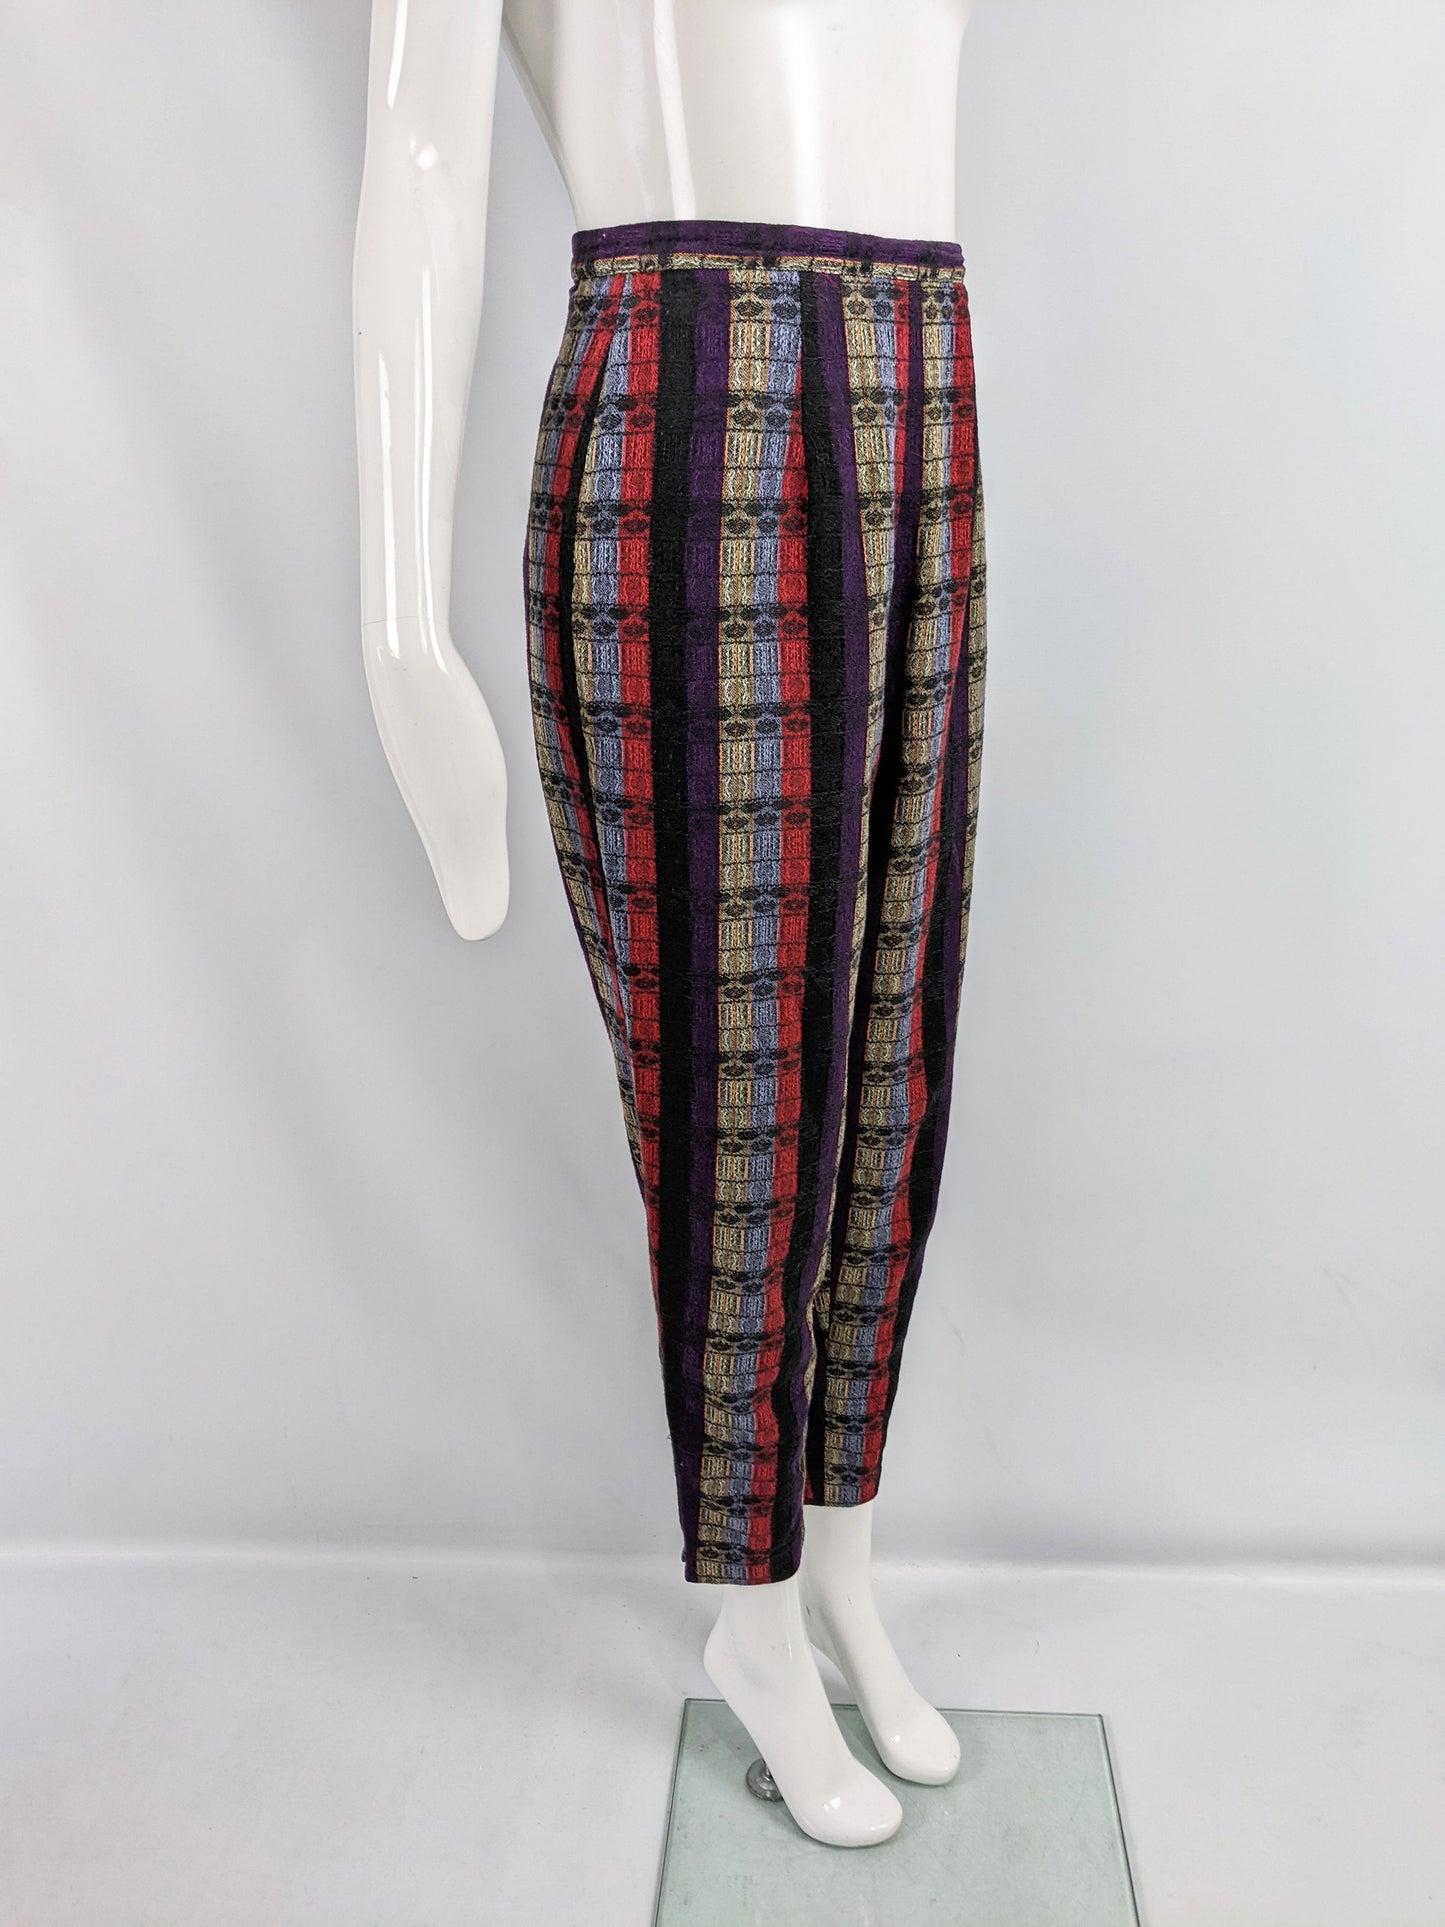 Shire Tex Vintage Multicoloured Woven Cotton High Waist Trousers, 1960s